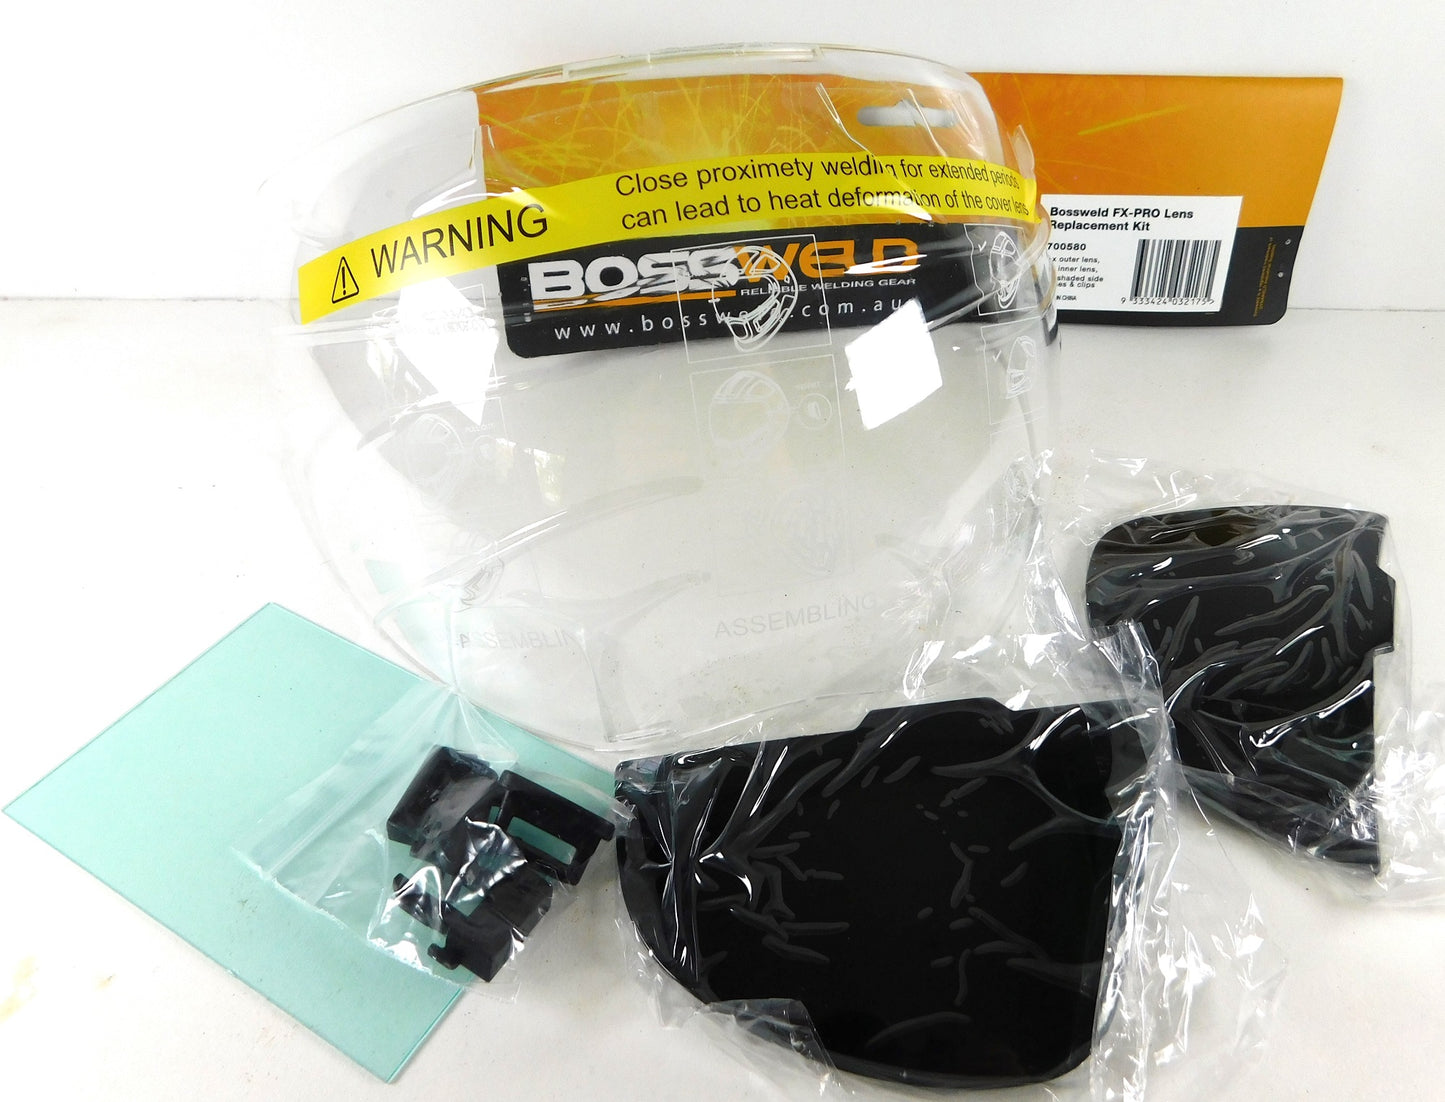 Bossweld FX-PRO Lens Replacement Kit 700580